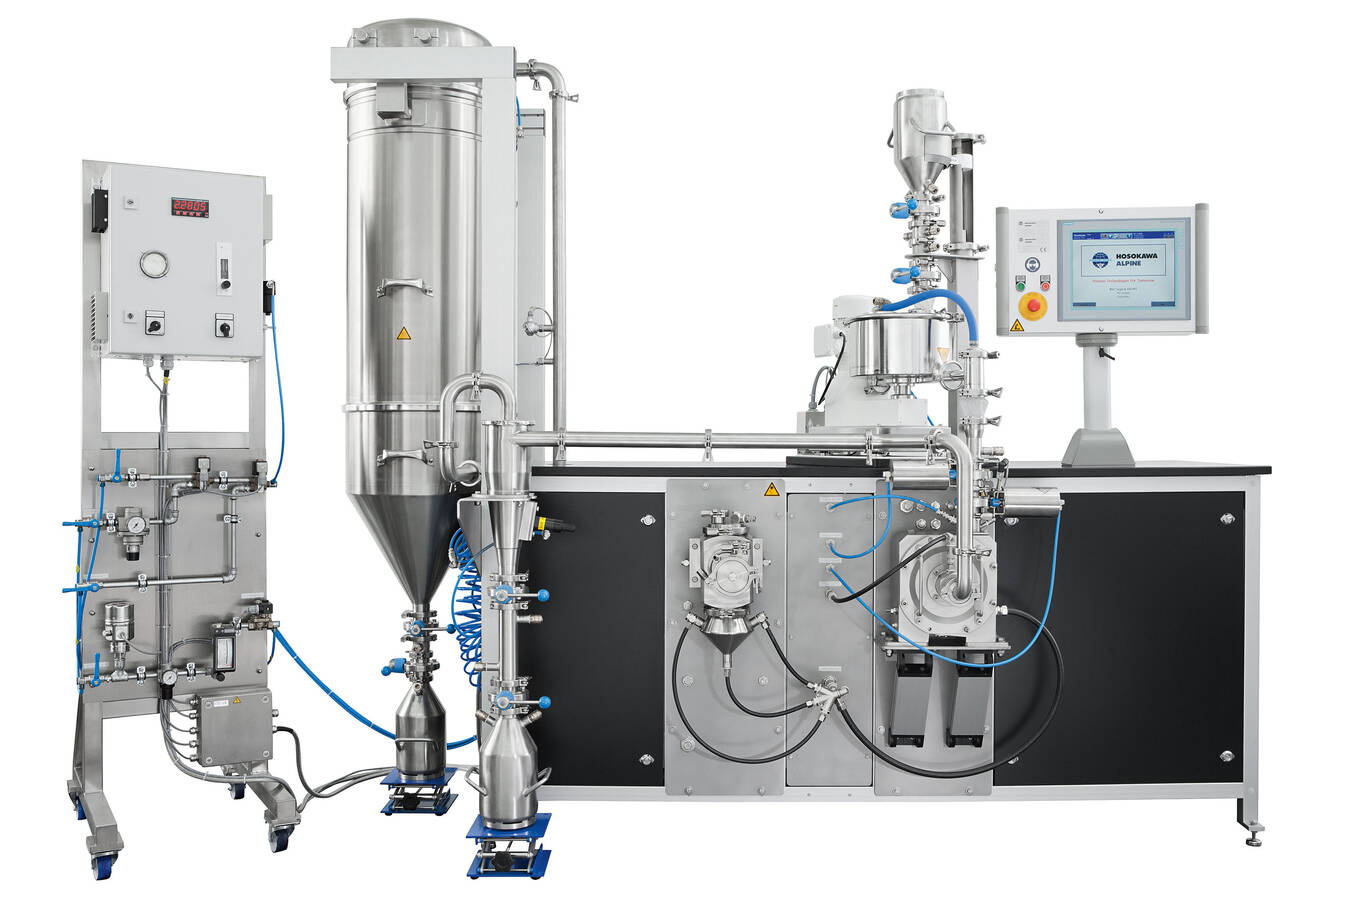 Multiprocessing systems: Flexibility and efficiency available quickly The modern production environment requires flexibility, efficiency and speed